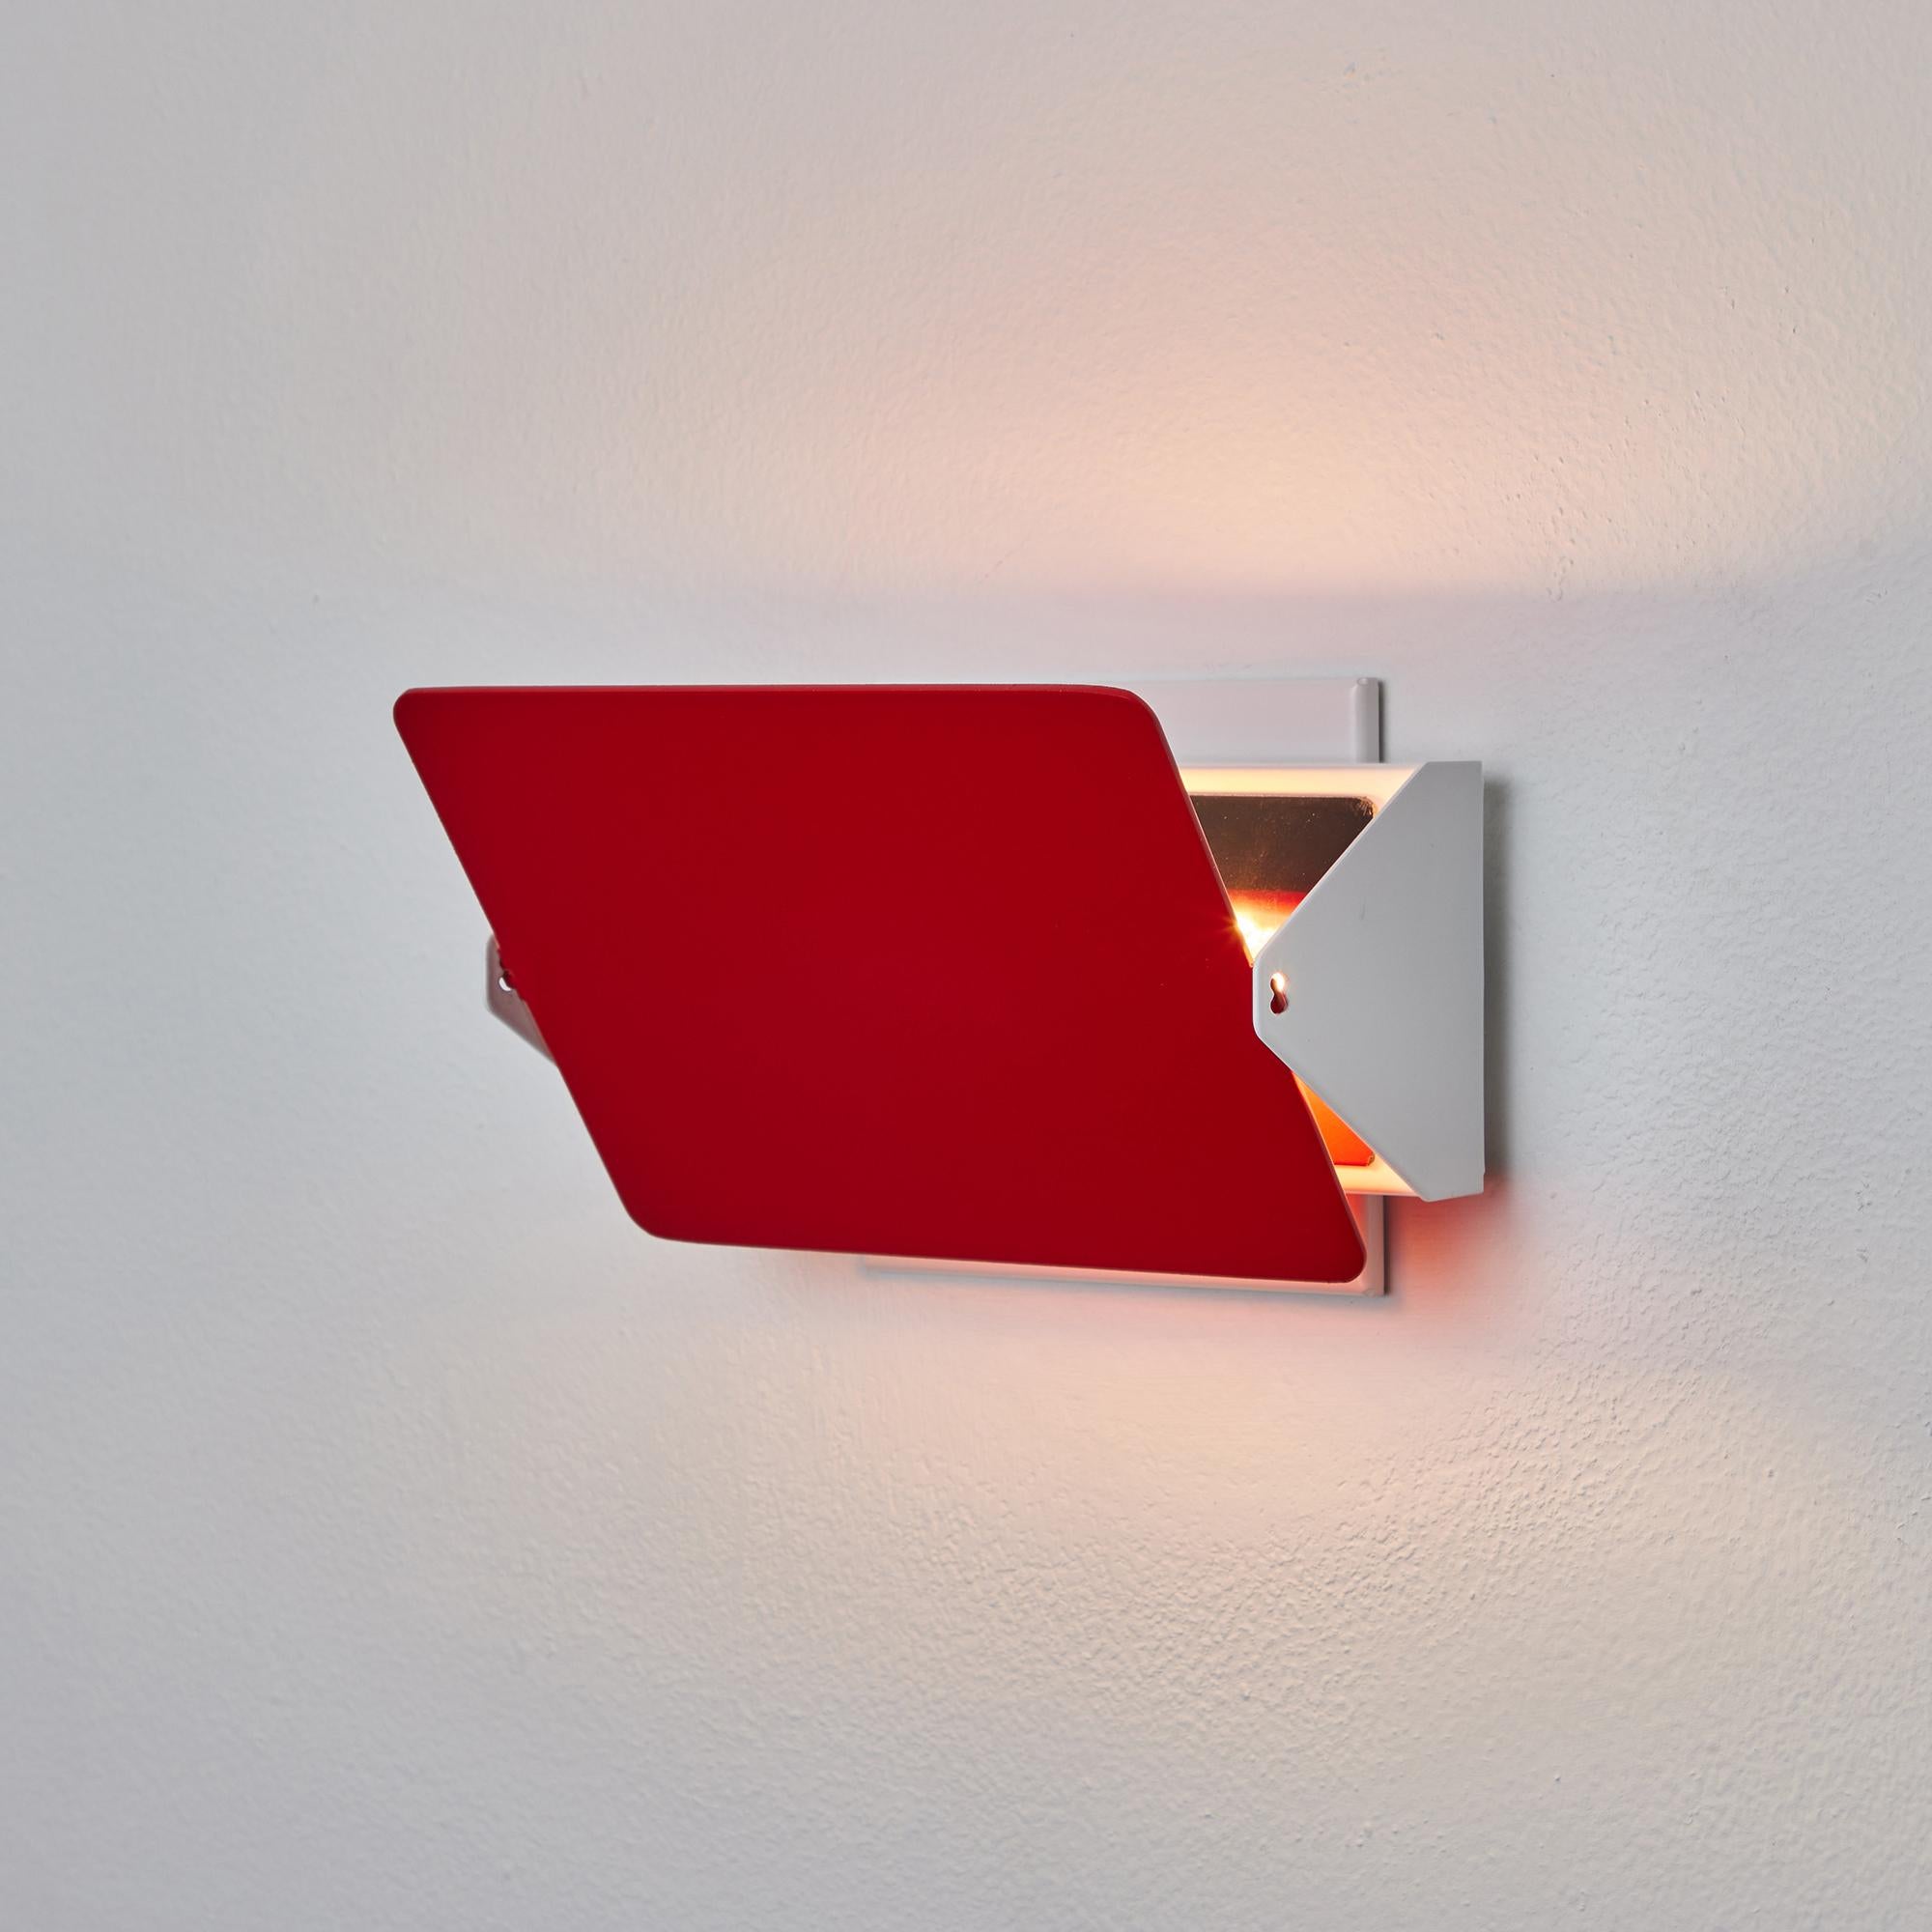 Painted Charlotte Perriand 'Applique à Volet Pivotant' Wall Light in Red for Nemo For Sale